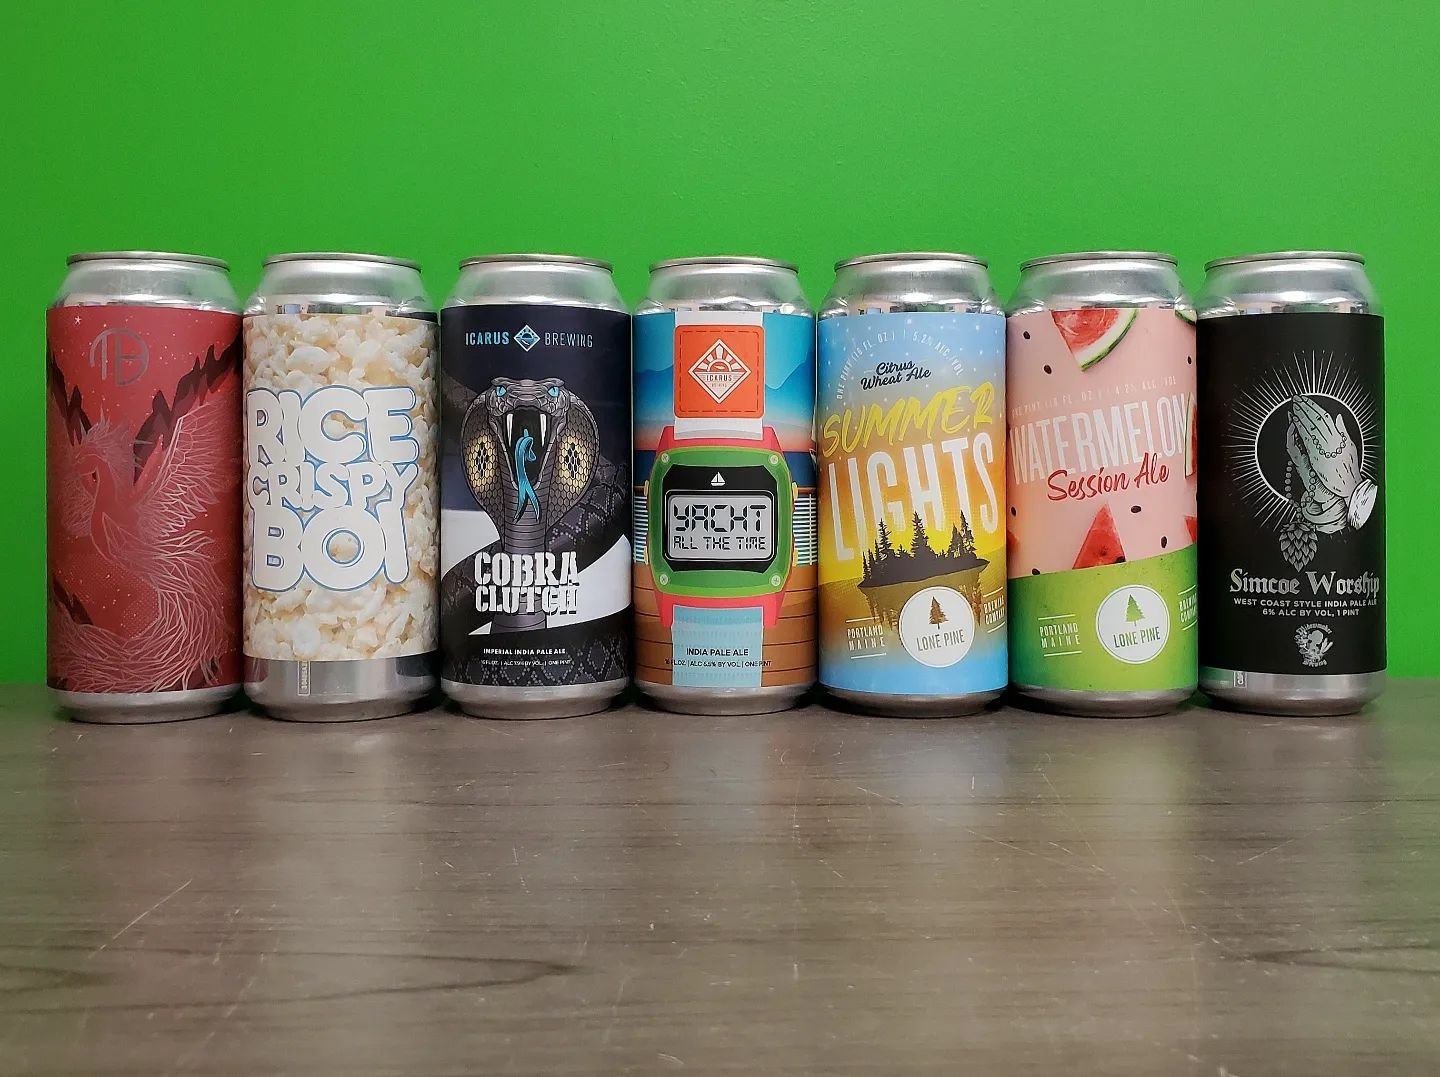 New arrivals! From left to right:
☆Mortalis Pheonix - strawberry daiquiri sour
☆Westbrook Rice Crisy Boi - rice lager w/marshmallows
☆Icarus Cobra Clutch - IIPA
☆Icarus Yacht All The Time - IPA
☆Lone Pine Summer Lights - citrus wheat ale
☆Lone Pine W